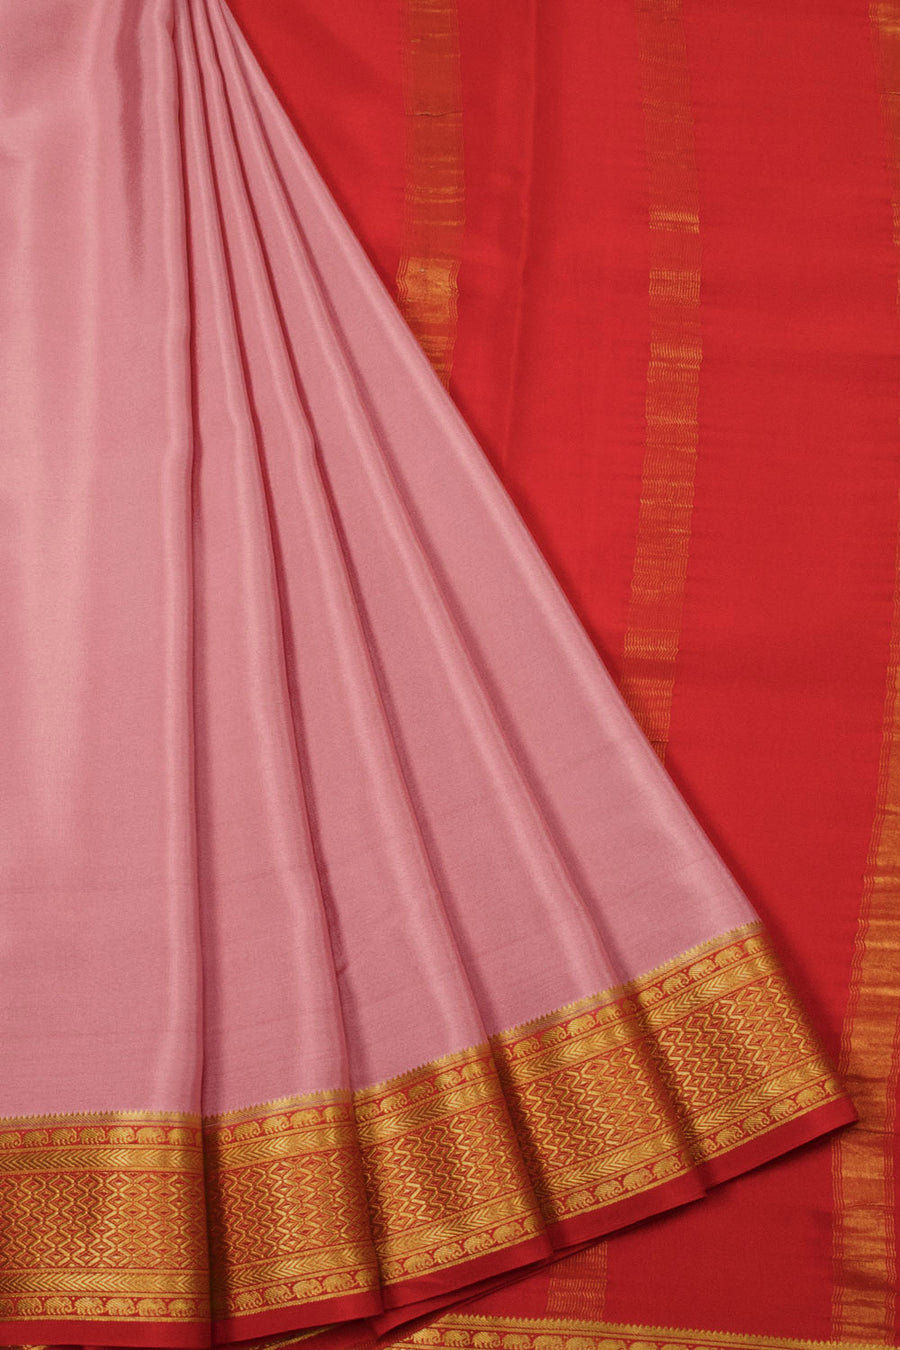 Baby Pink with Red Mysore Crepe Silk Saree - 10064303